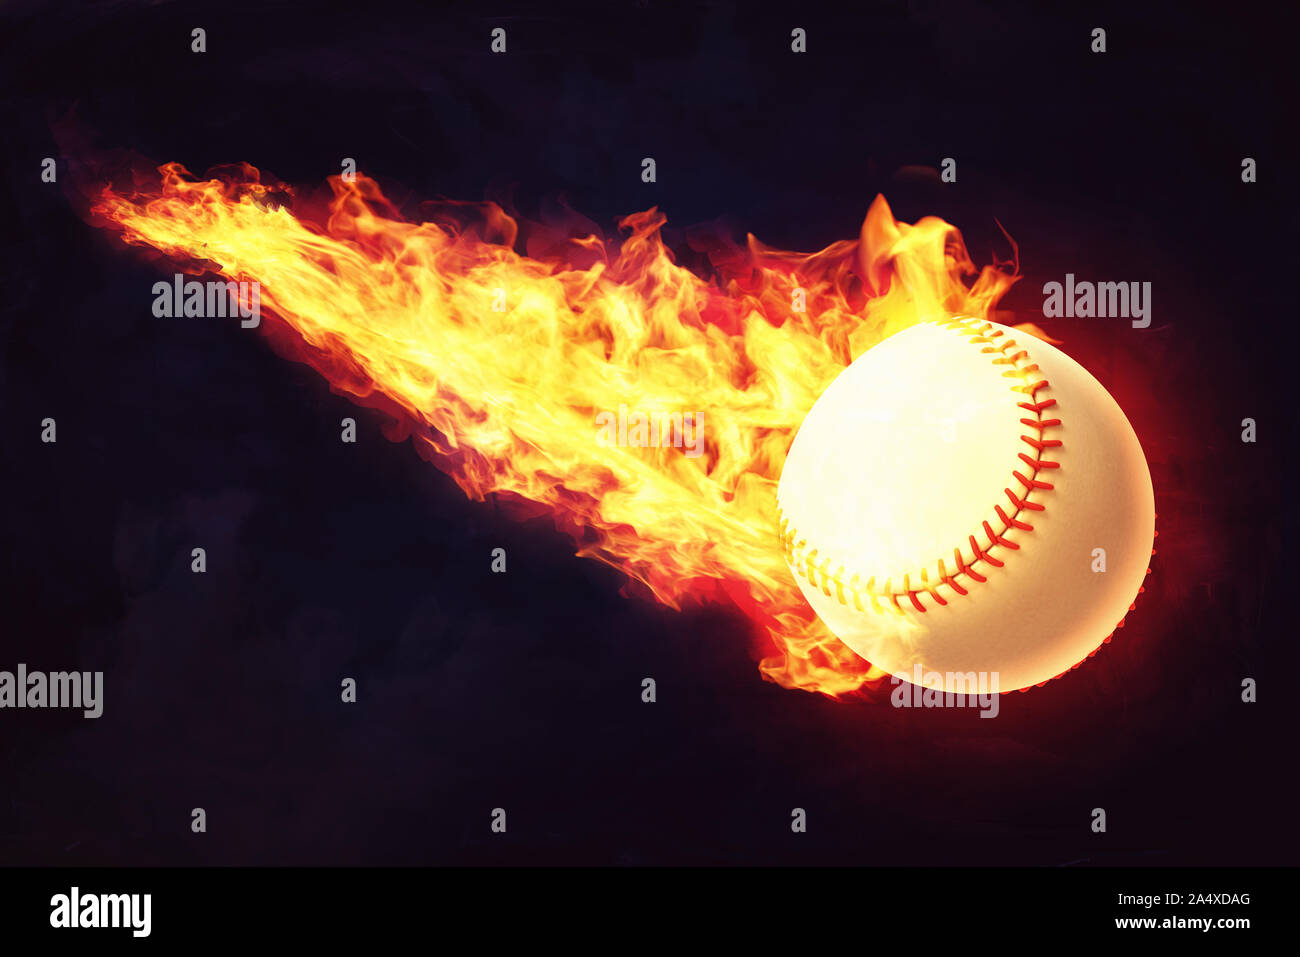 4,113 Baseball On Fire Images, Stock Photos, 3D objects, & Vectors